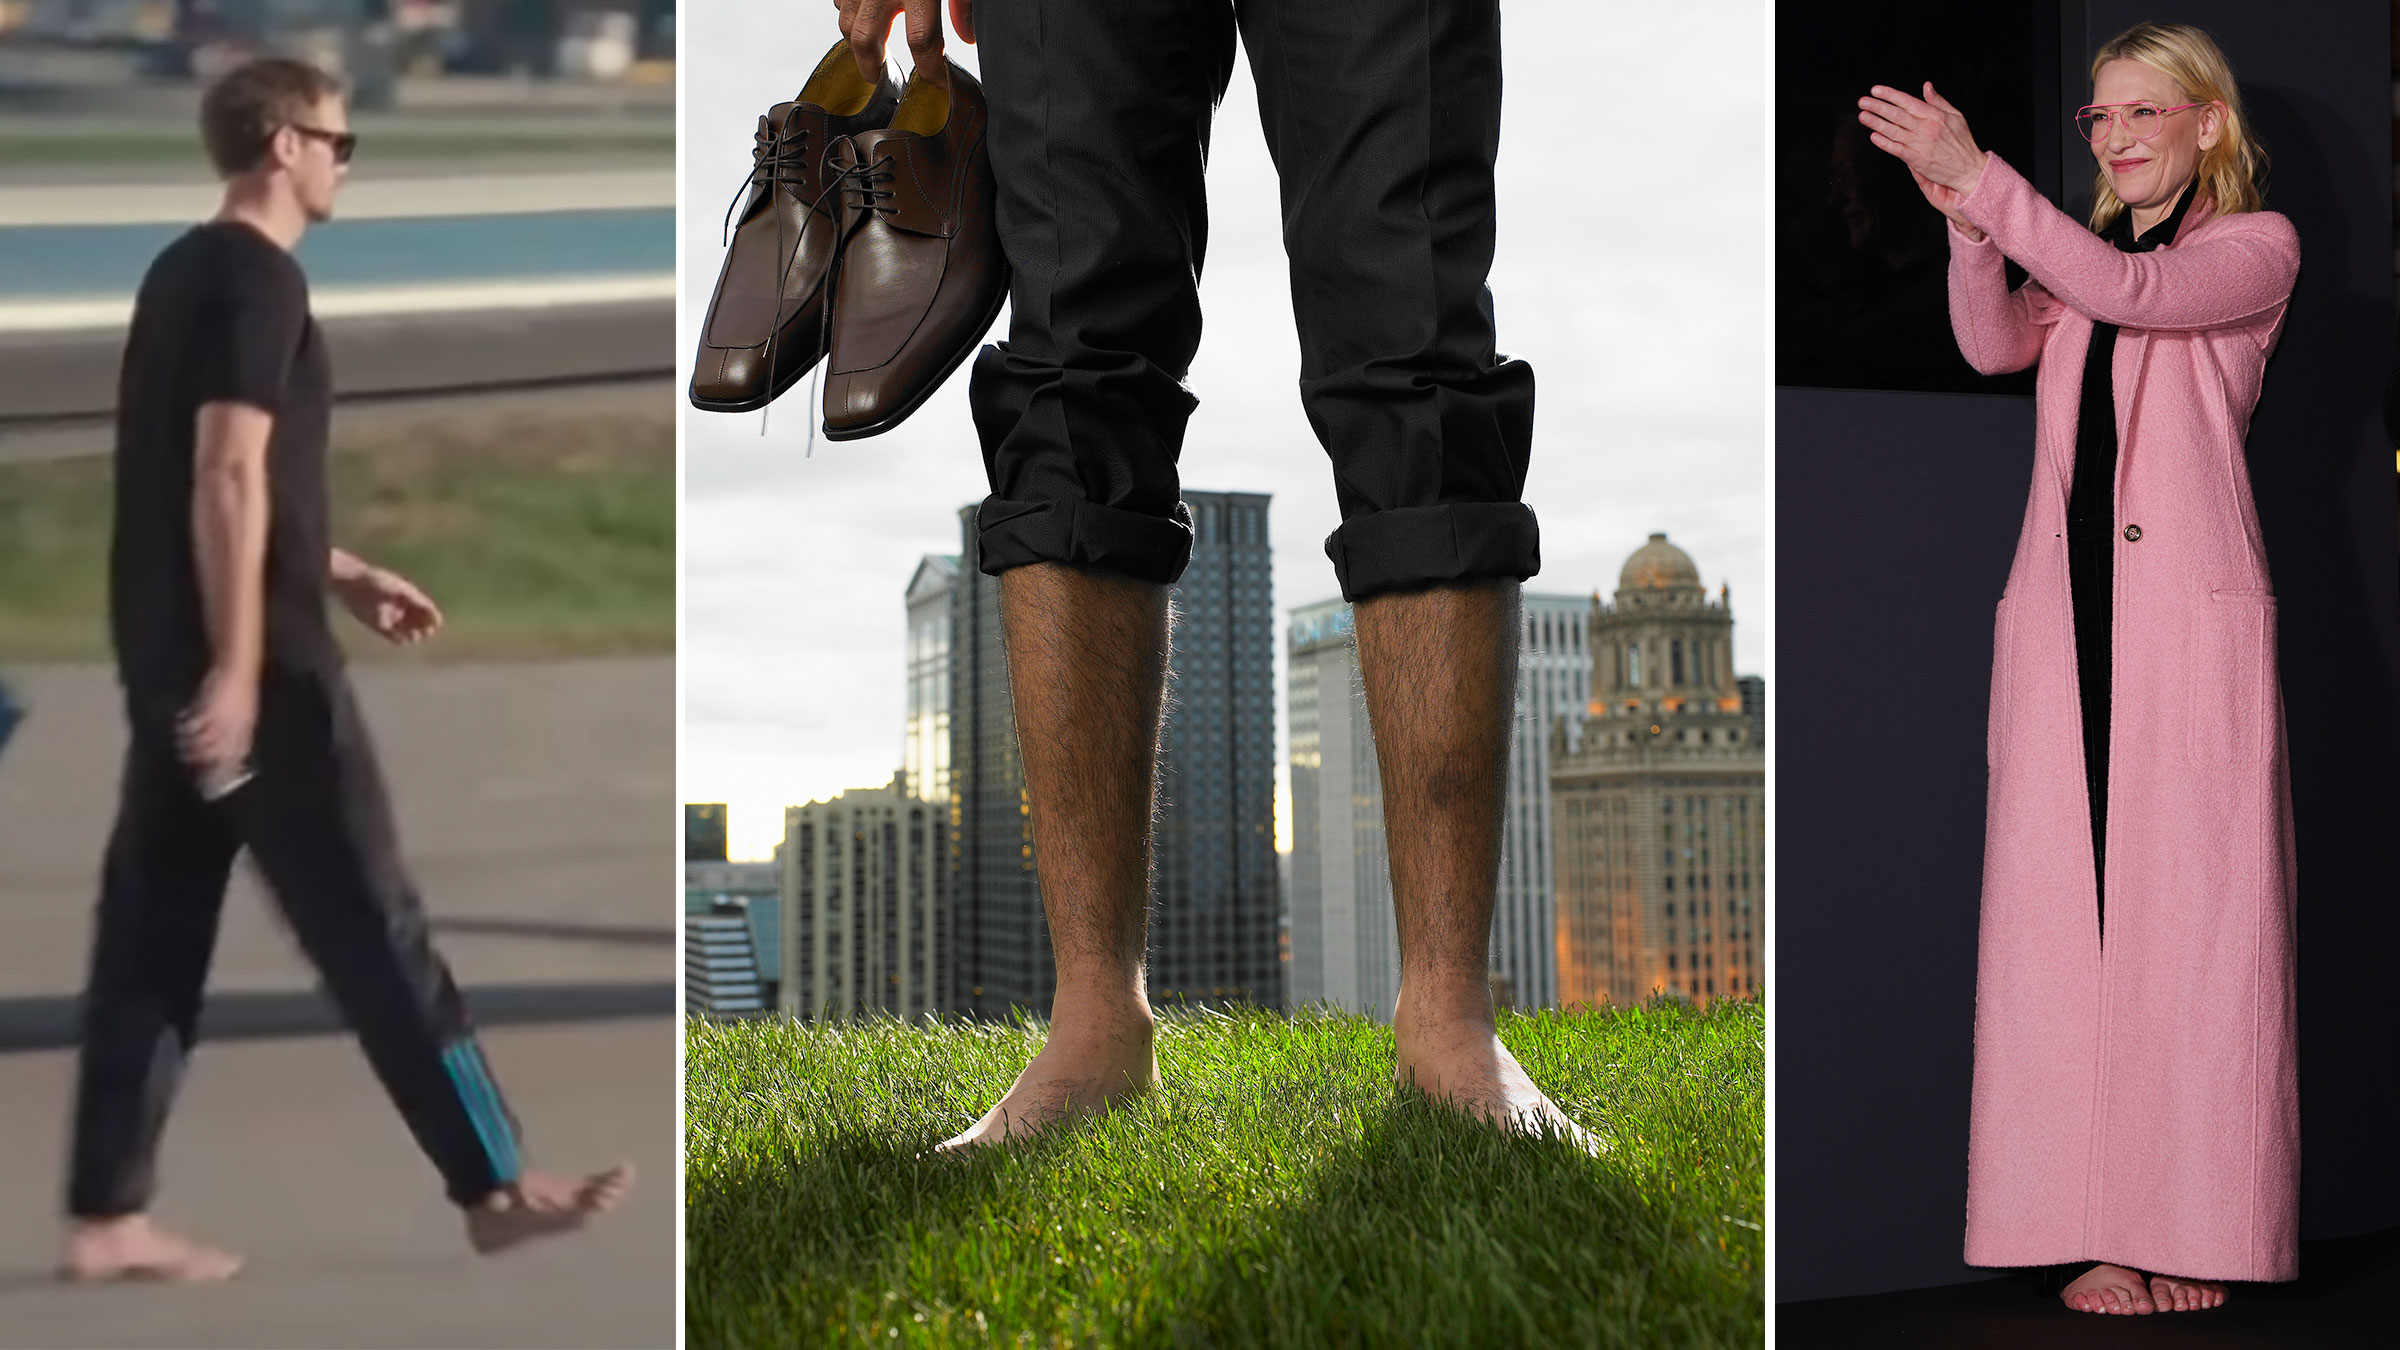 Do You Wear Socks With Barefoot Shoes? Know the Dos & Don'ts